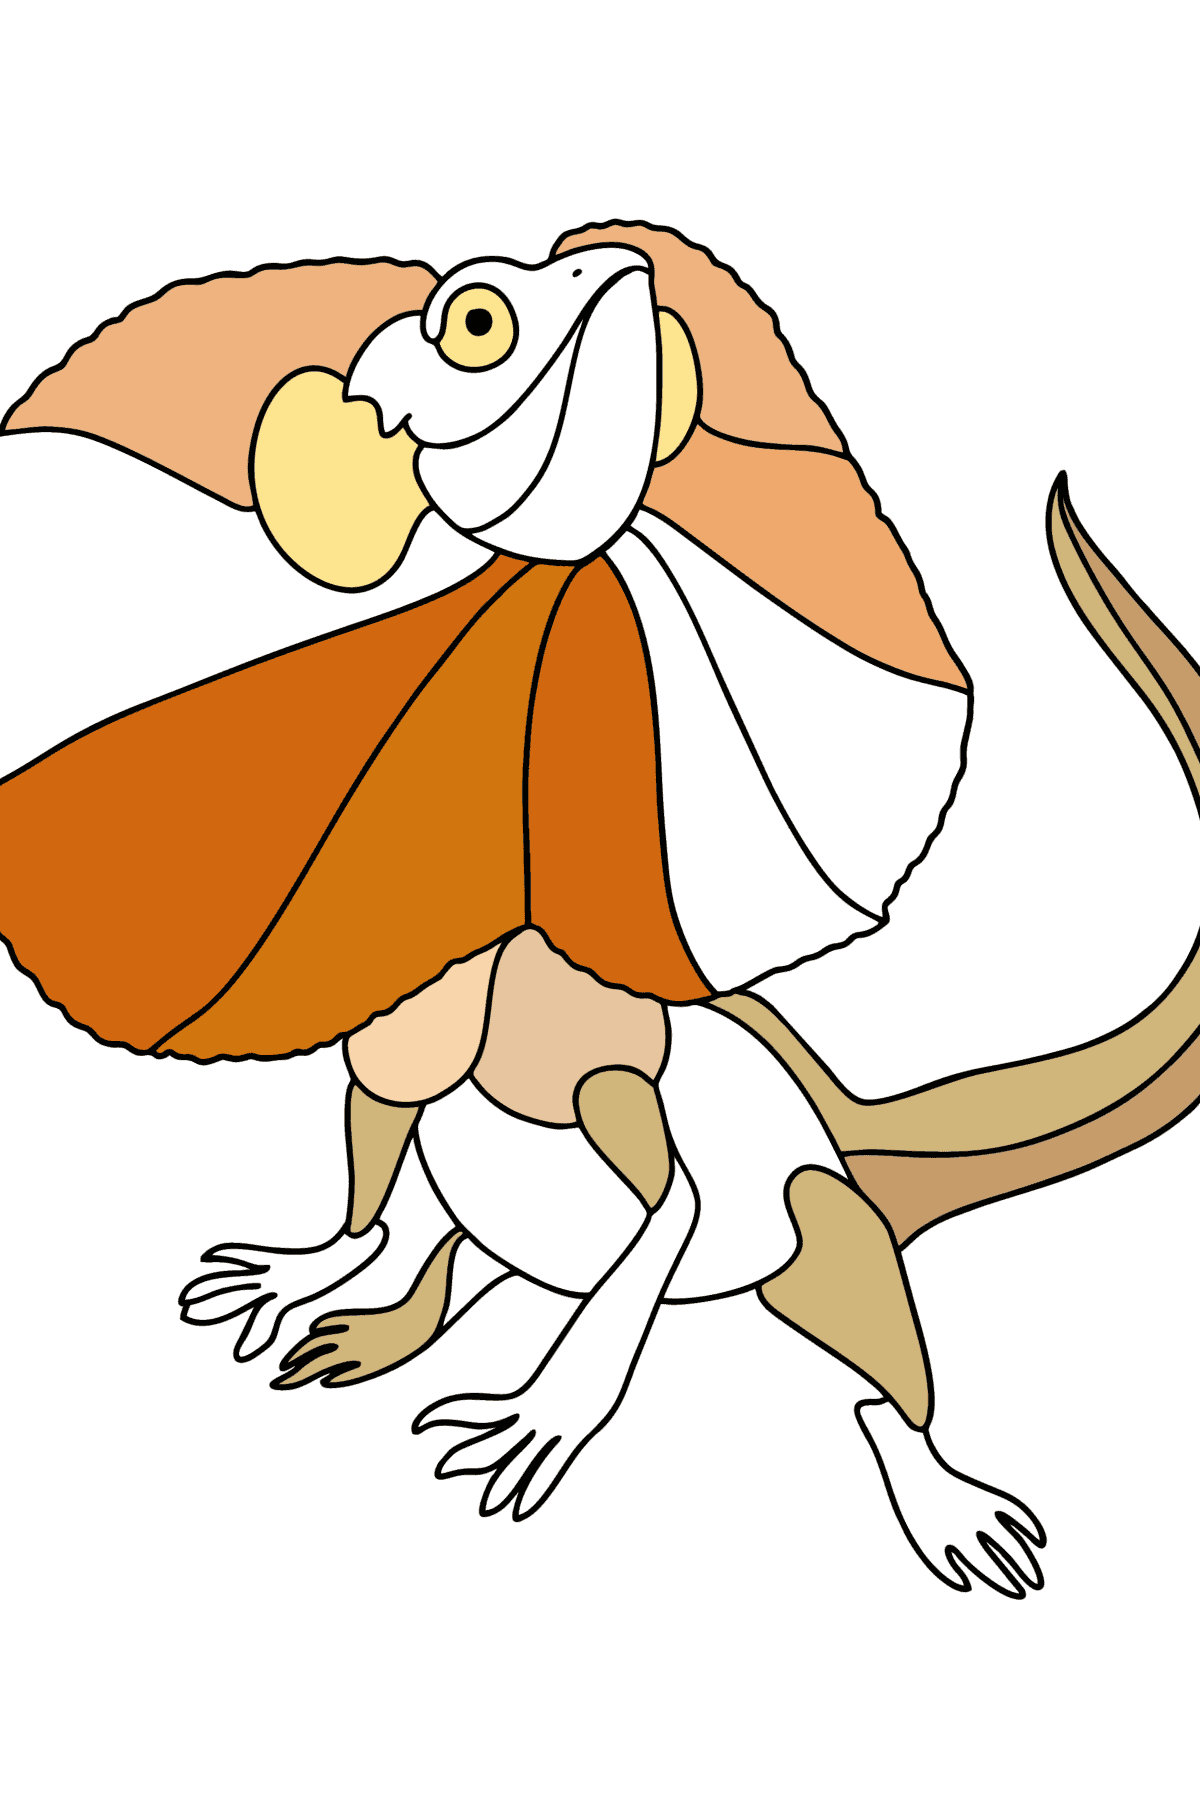 Frilled lizard сolouring page - Coloring Pages for Kids